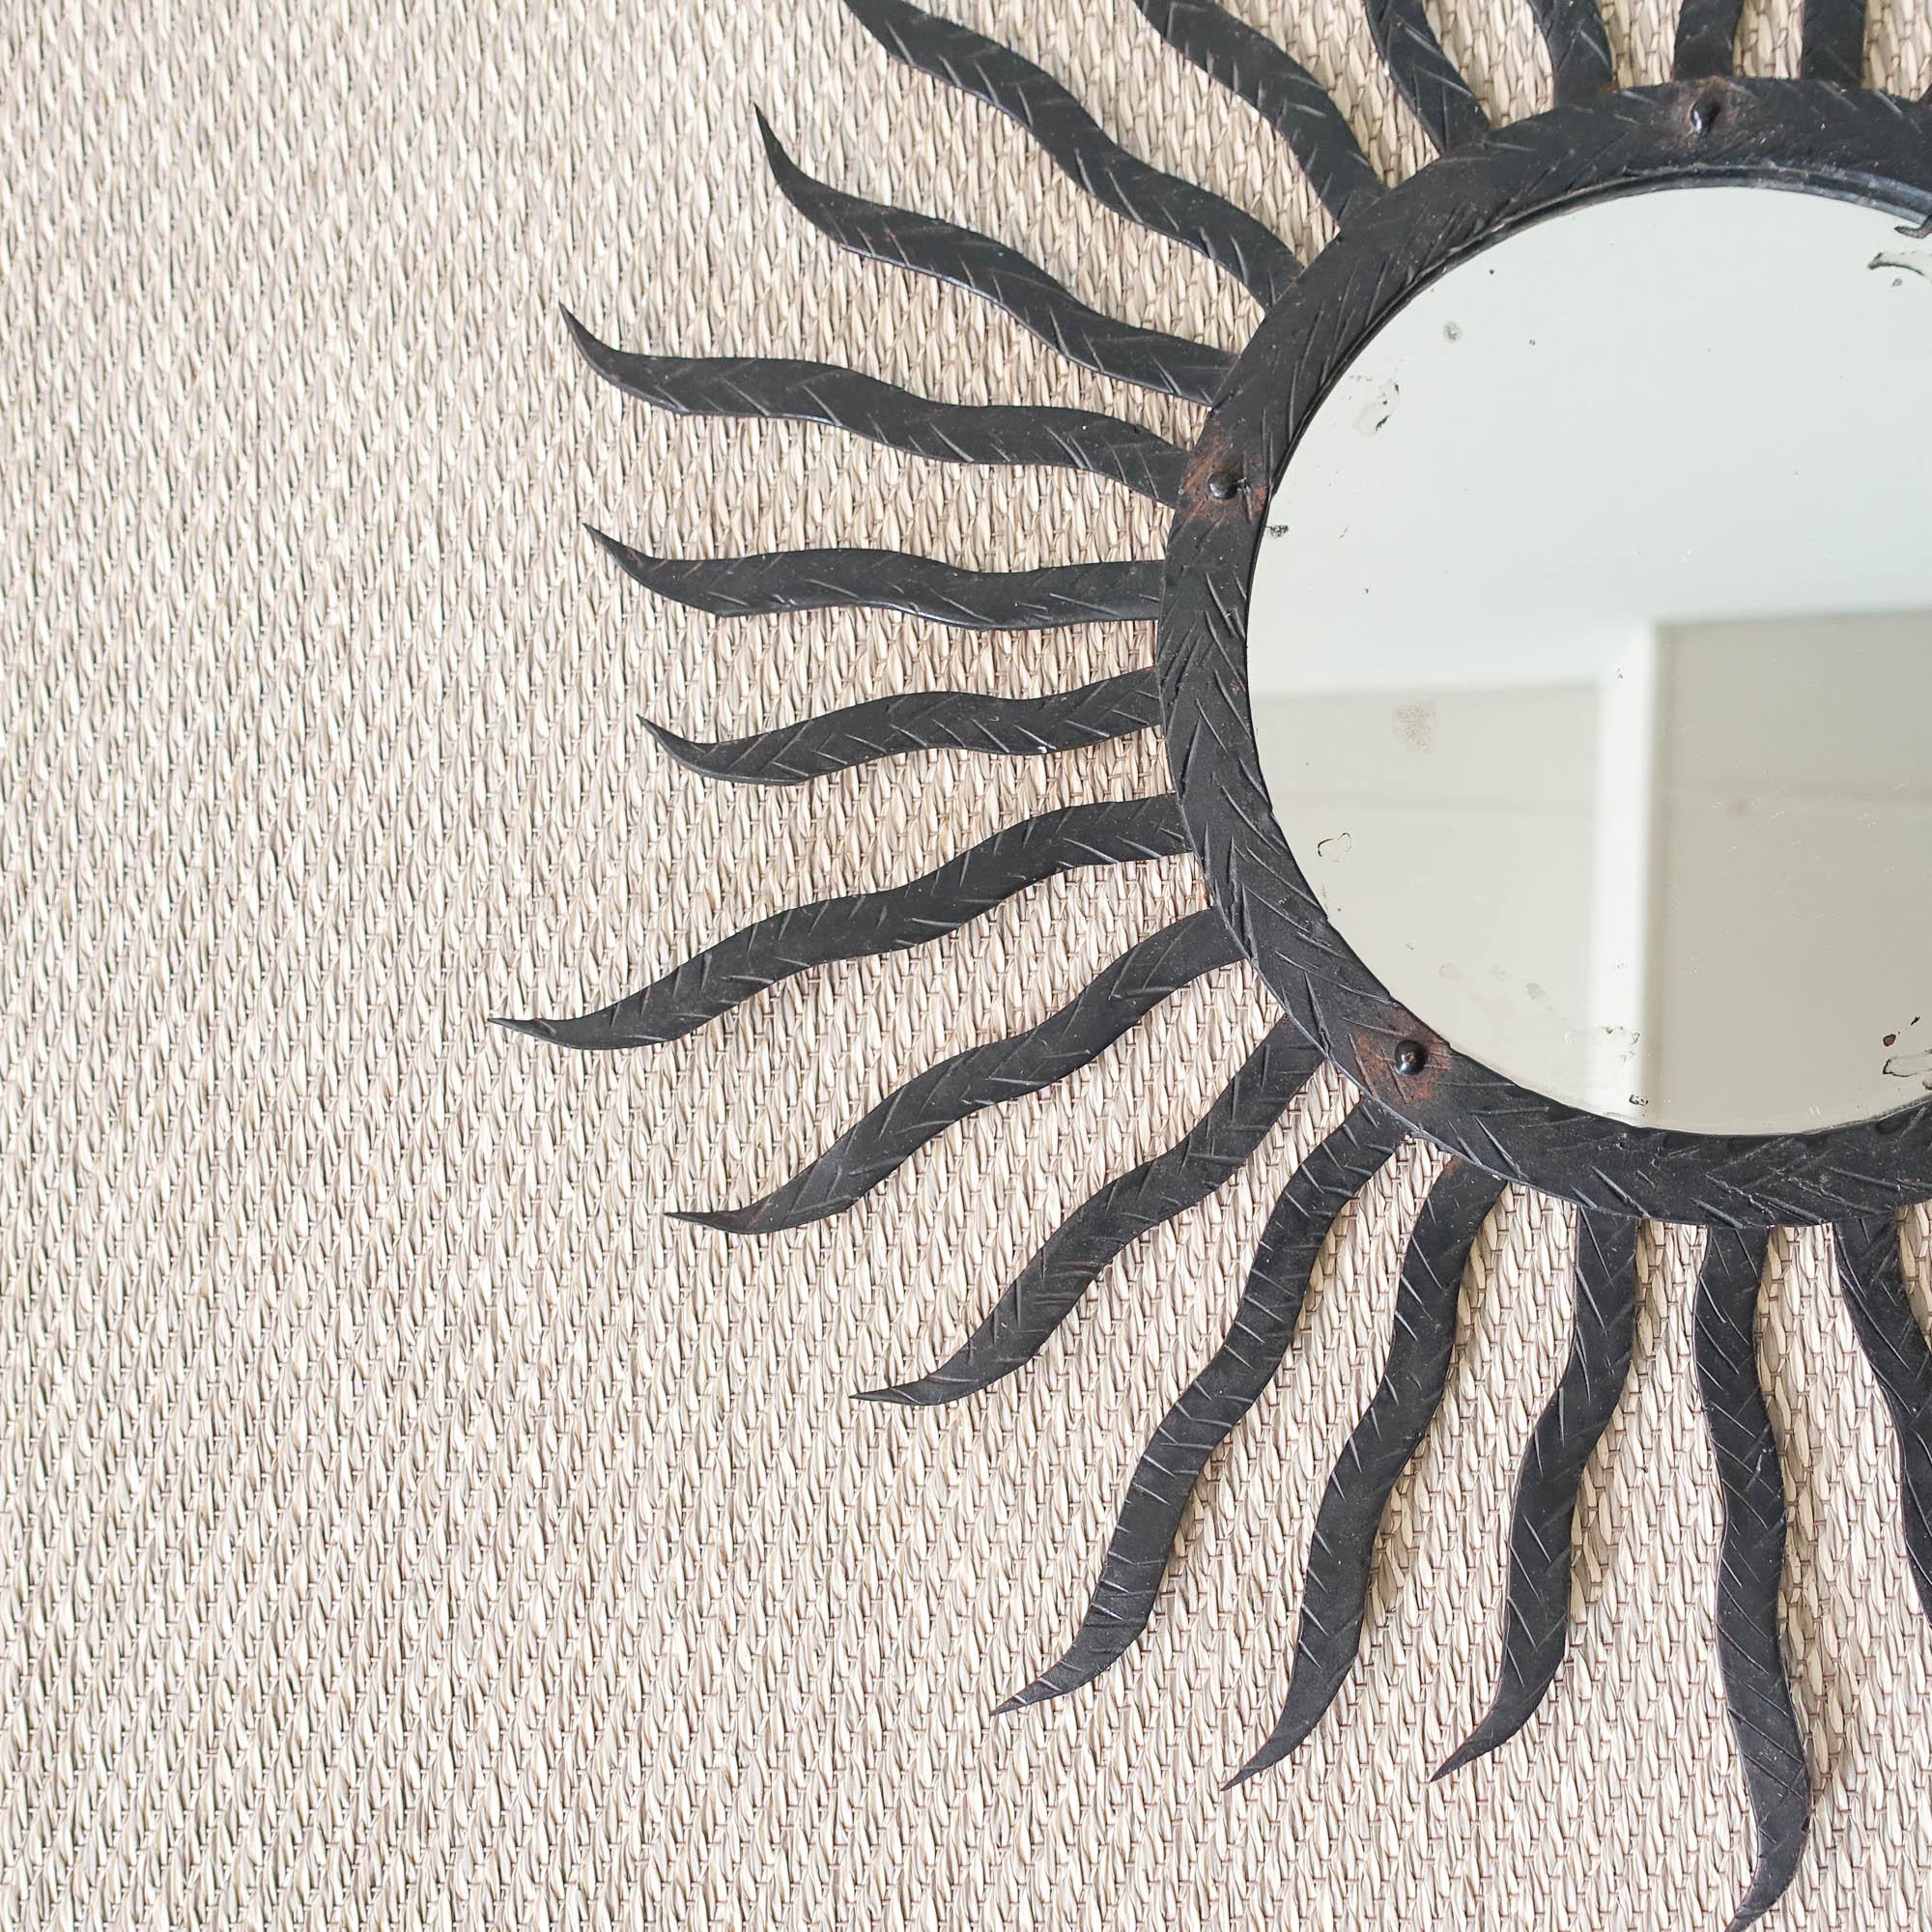 This sunburst mirror was designed and produced in Italy, during the 1950’s.
It features a carved black metal frame made of long and shorter ones. The ring surrounding the central mirror has also a carved decorative random pattern. 
In original and